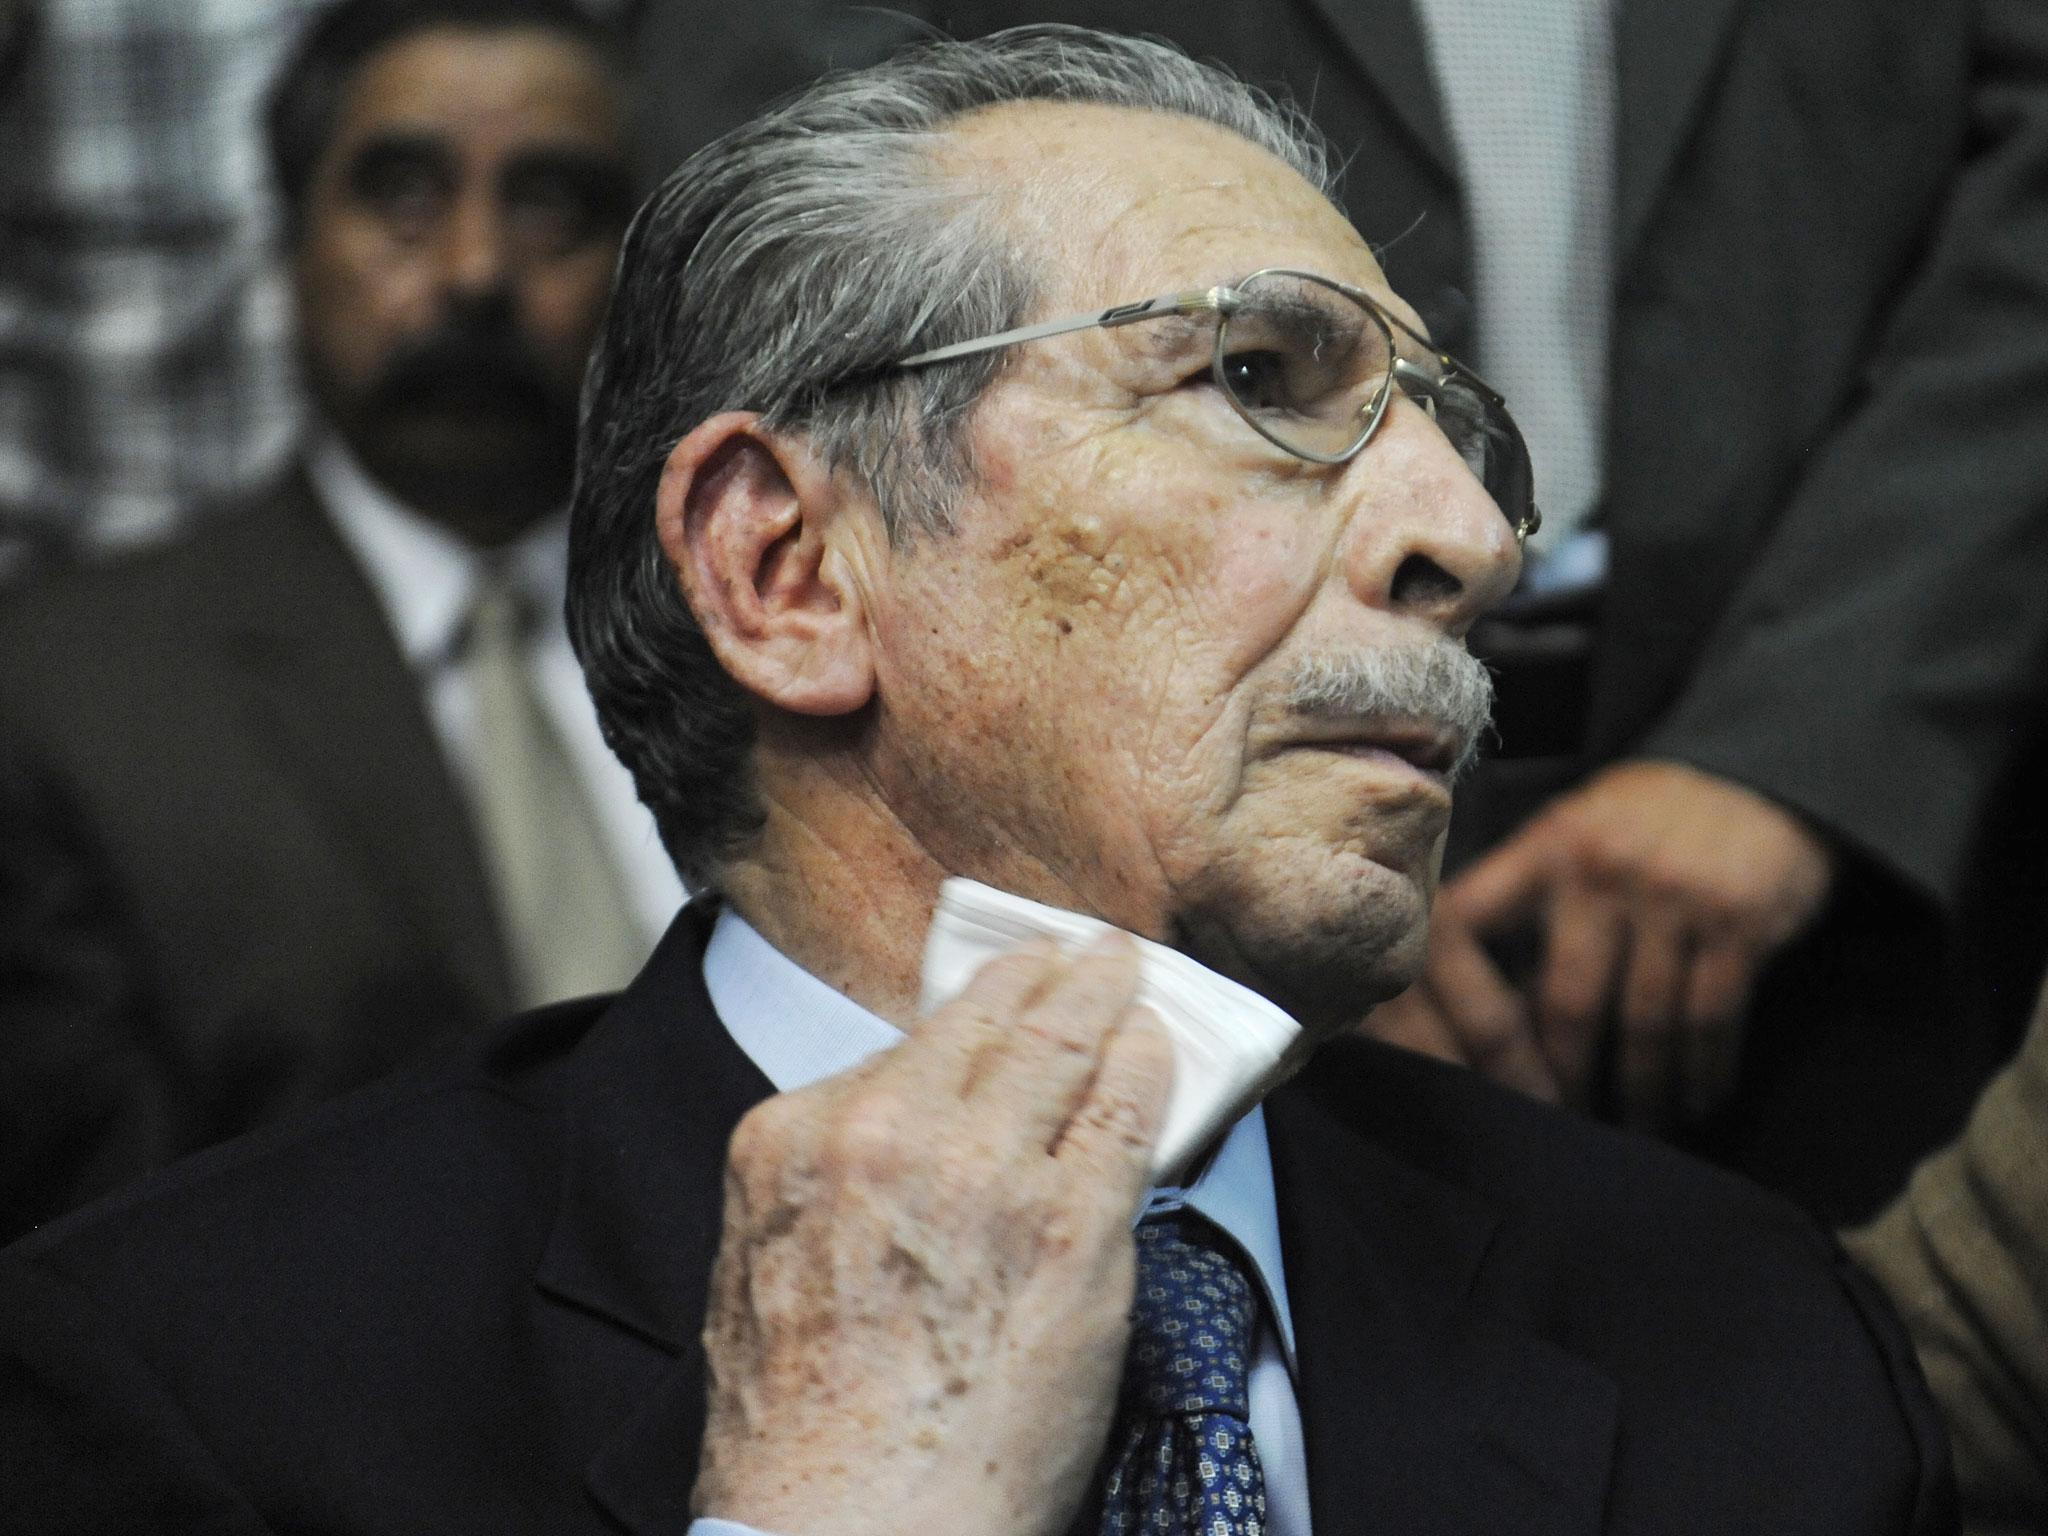 Former Guatemalan de facto President Jose Efrain Rios Montt listening to his sentence on charges of genocide